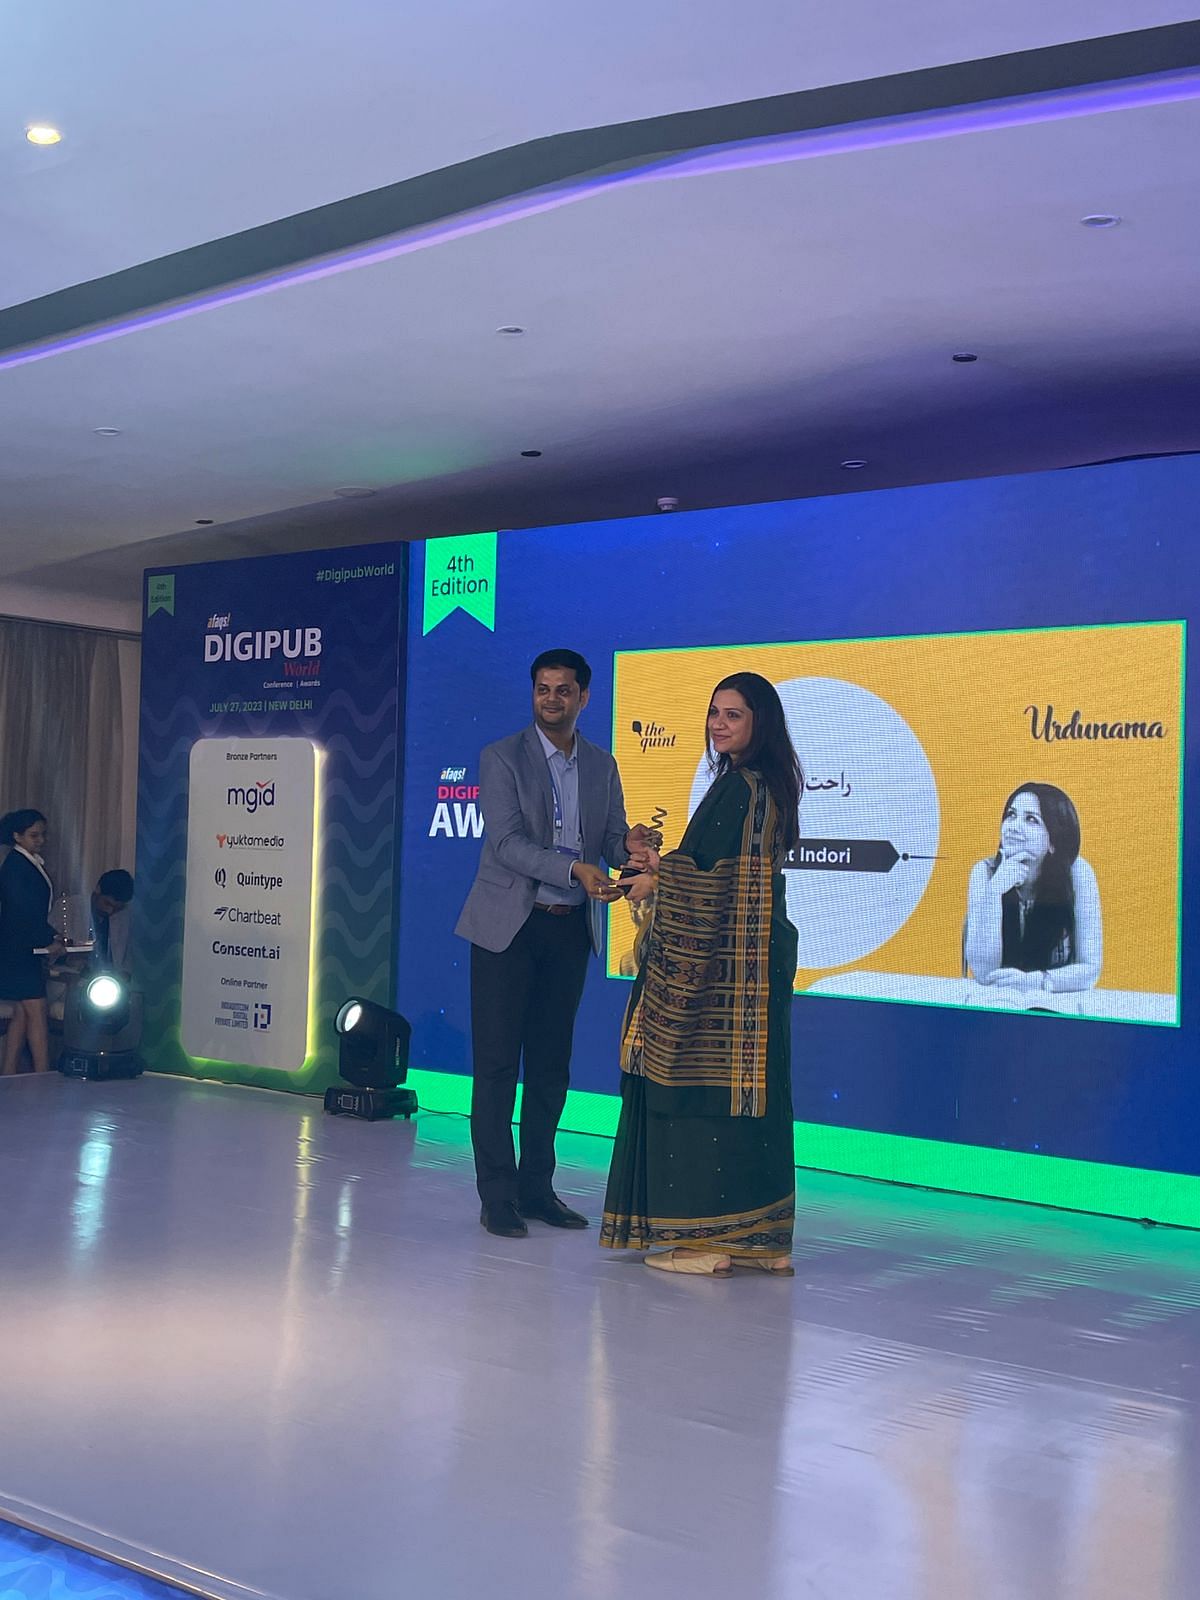 We are delighted to announce that The Quint has won 15 awards across categories at the afaqs! Digipub Awards 2023! 